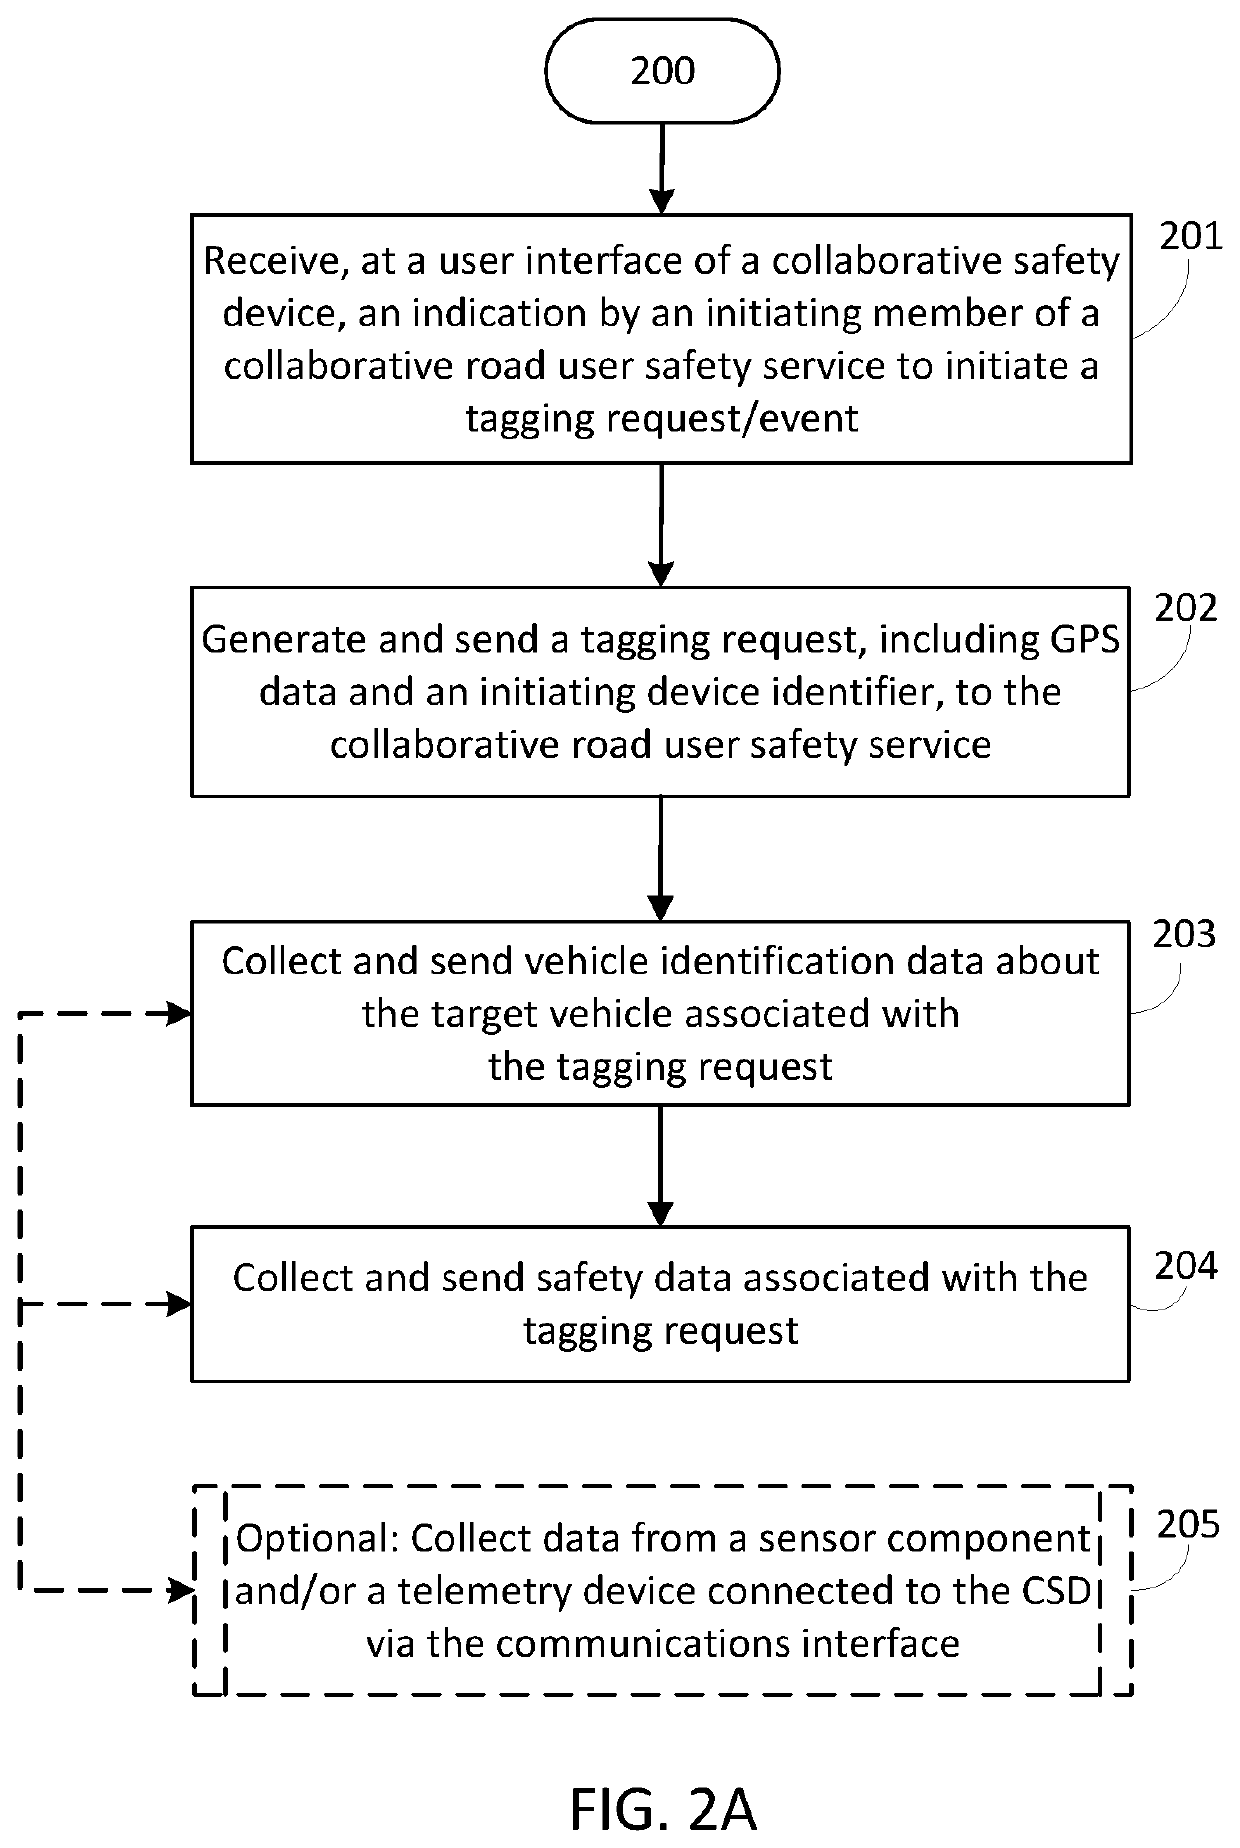 Systems and methods for collaborative road user safety